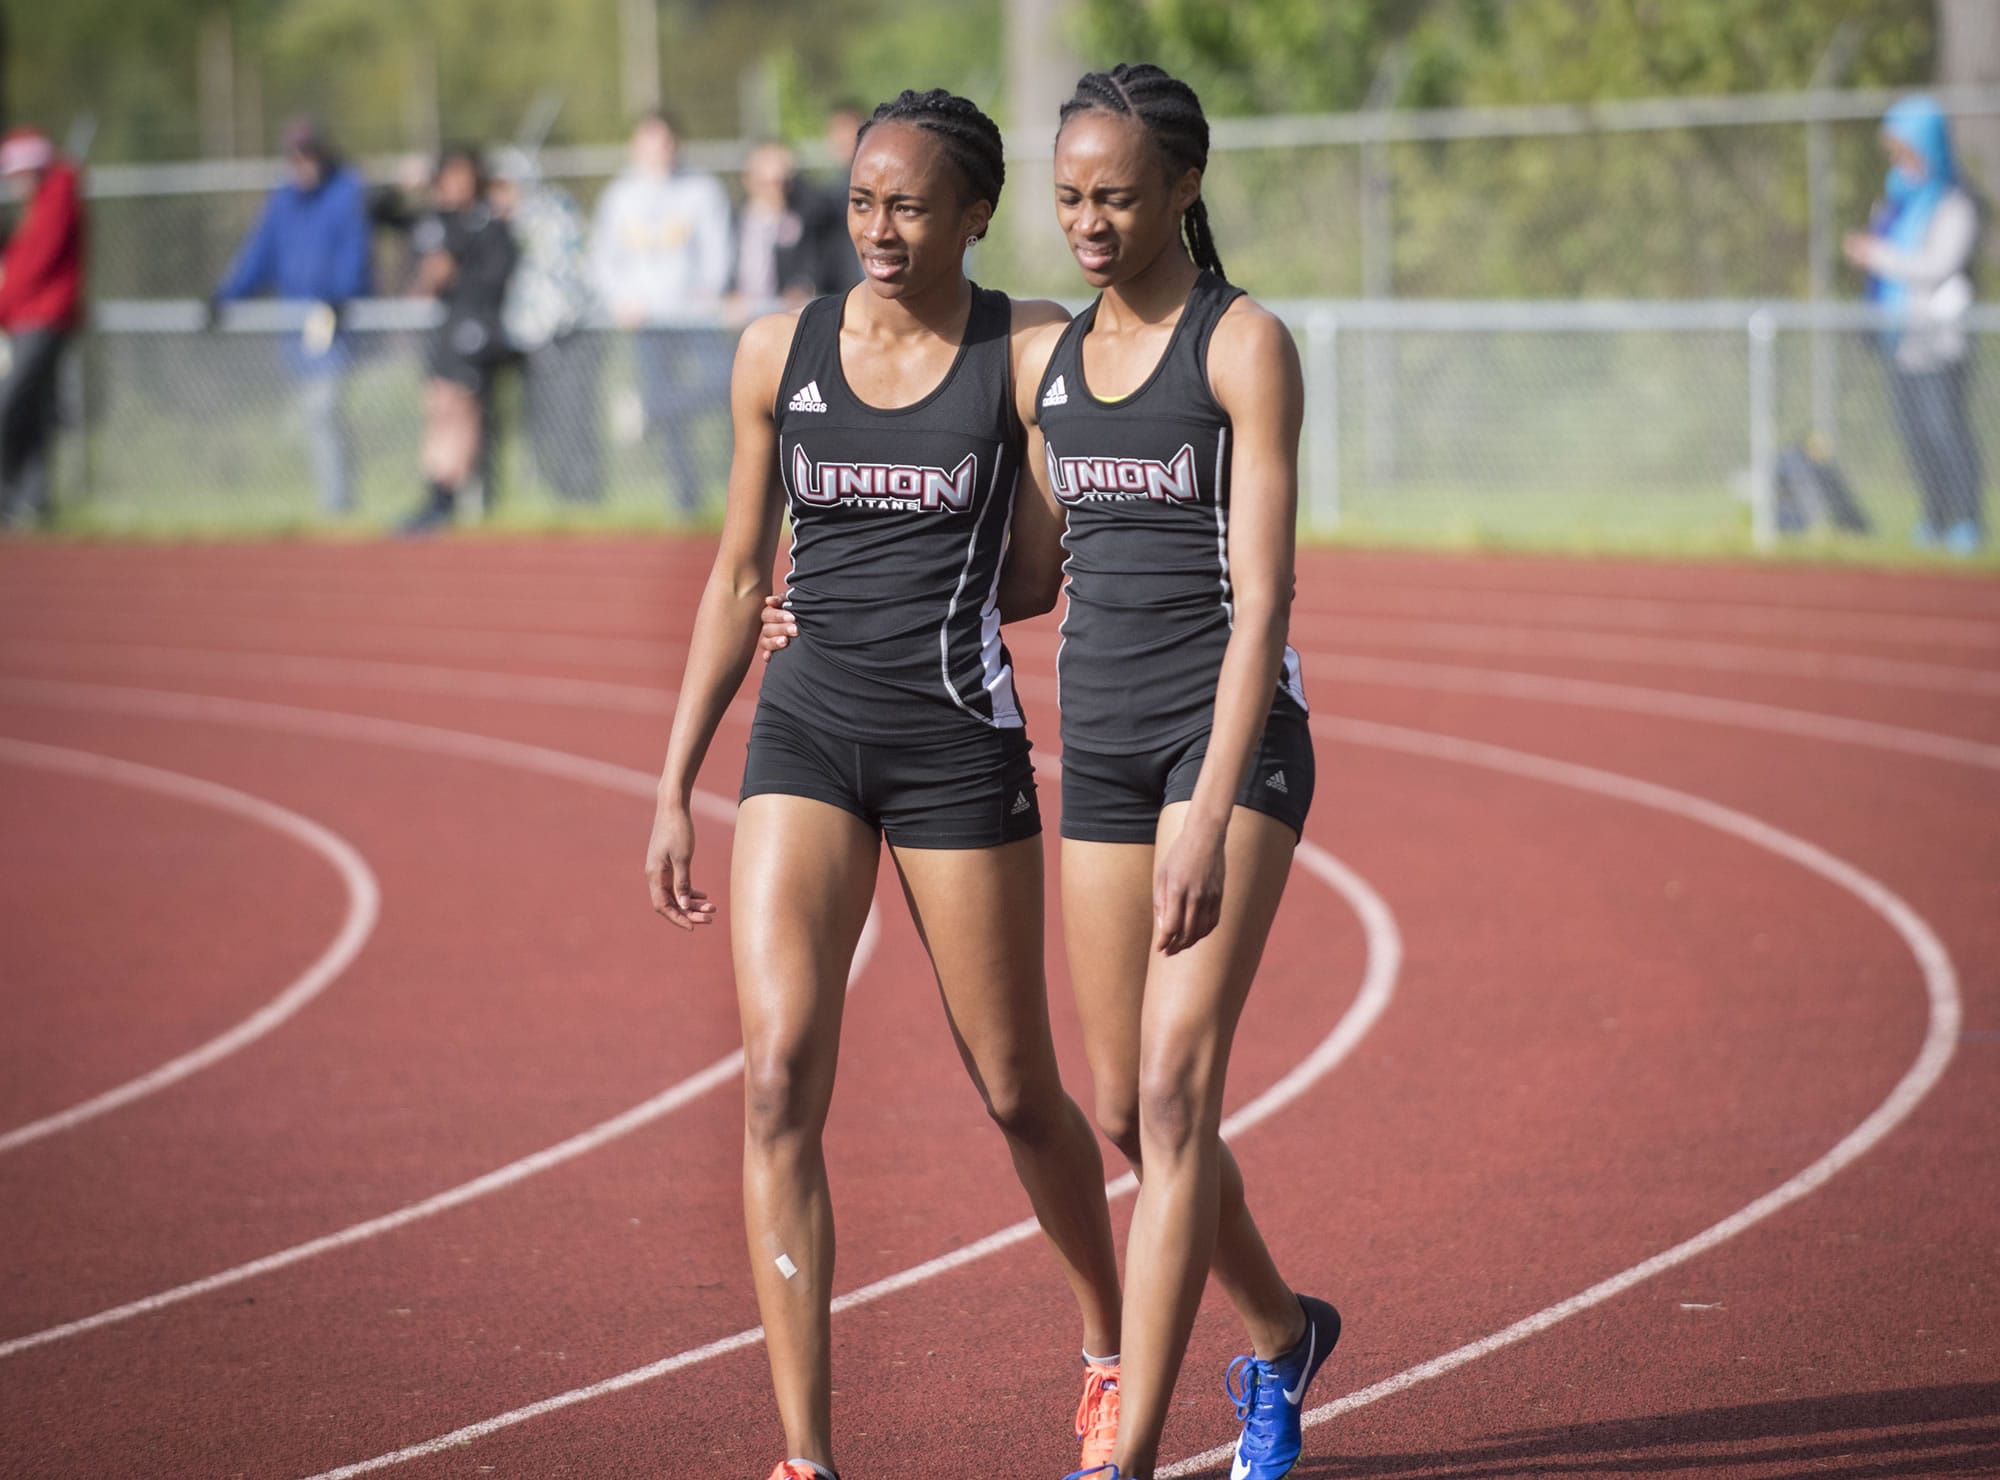 Union twins Dai’lyn Merriweather, left, and Jai’lyn Merriweather wrap their arms around each other after taking first and second in the 4A girls 200 meters during the second day of the 3A-4A District track meet at McKenzie Stadium, Thursday May 11, 2017.